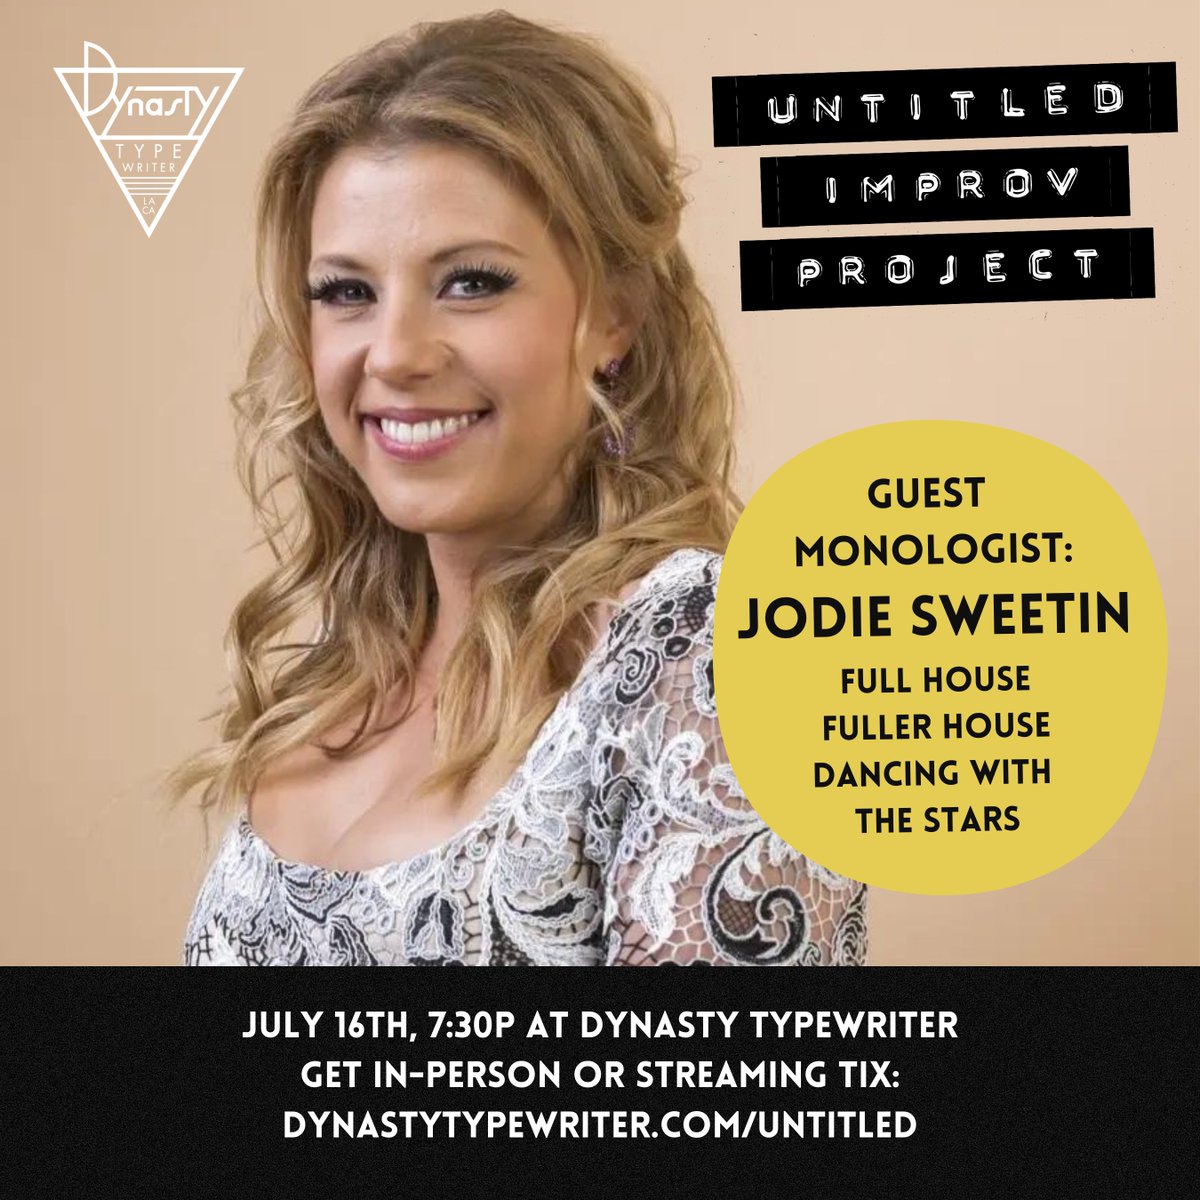 This Sunday at @JoinTheDynasty: @UntitledImprov with guest JODIE SWEETIN! PLUS @beckdrys @thebrianhuskey Caroline Martin @danlippertcool @jacquisneal Jessica McKenna @rekhalshankar and more! Get your in-person or streaming tickets now dynastytypewriter.com/untitled